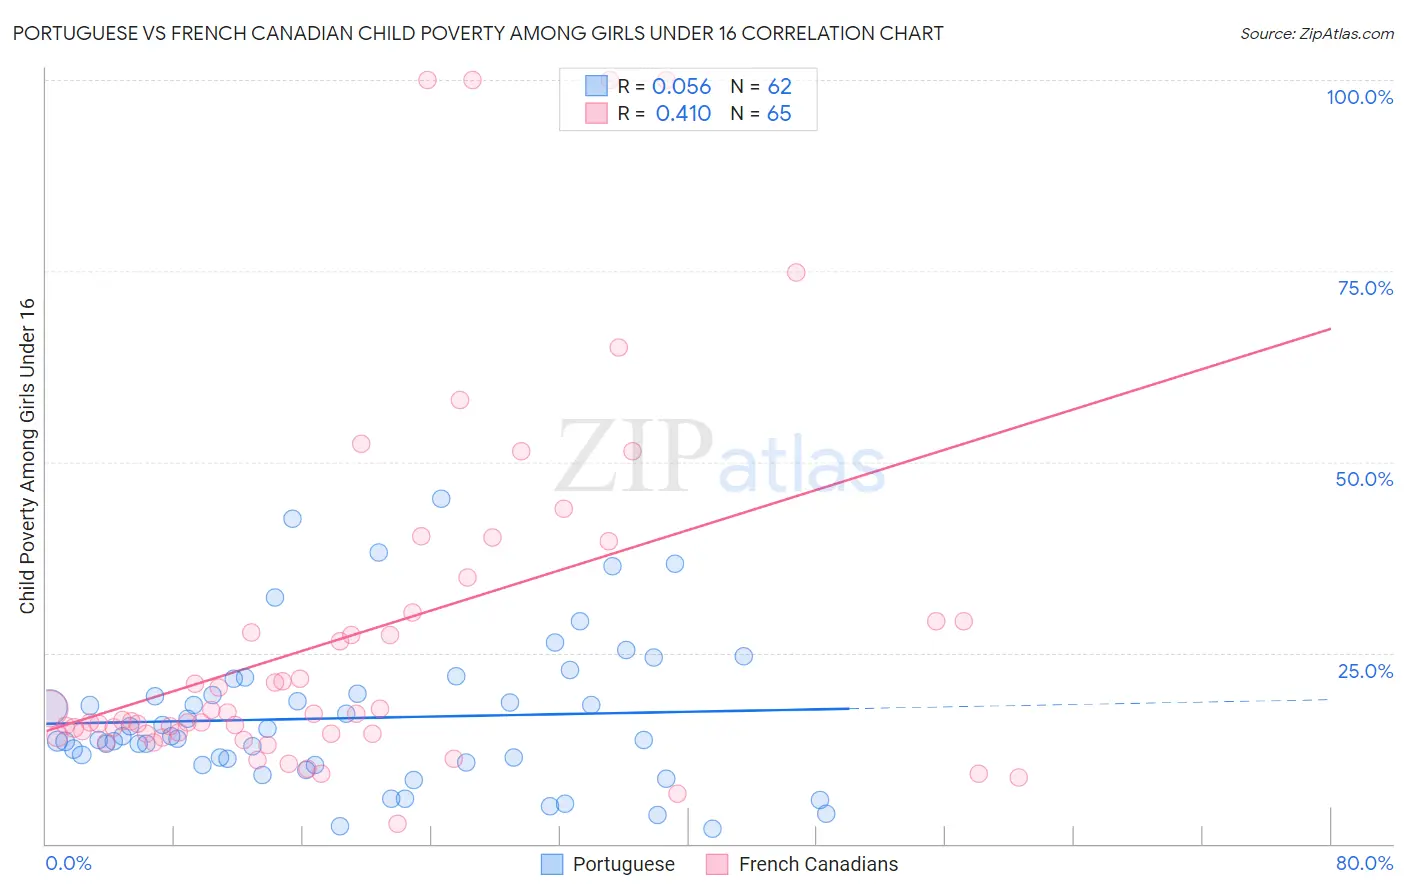 Portuguese vs French Canadian Child Poverty Among Girls Under 16